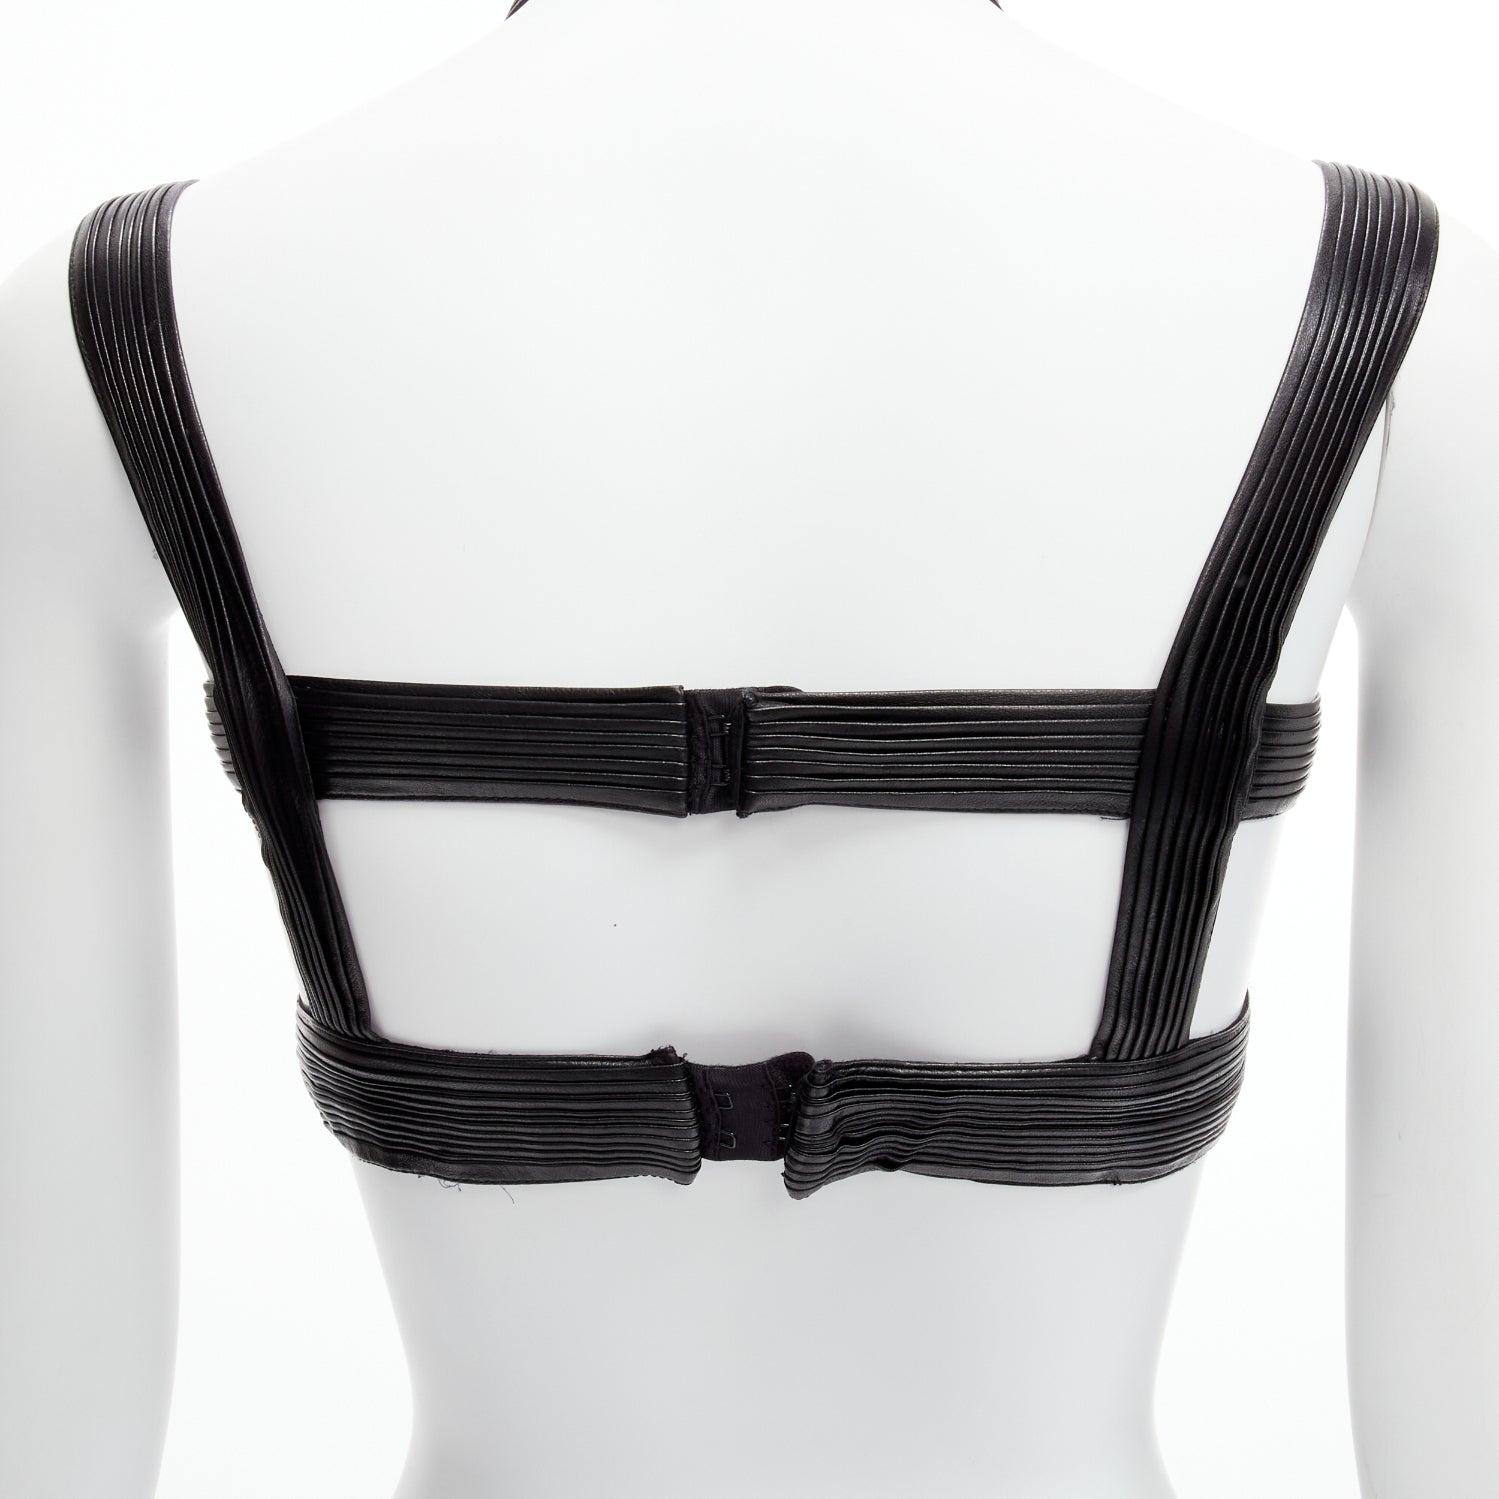 rare GIVENCHY Riccardo Tisci 2014 Runway leather pleated halter harness bra top For Sale 4